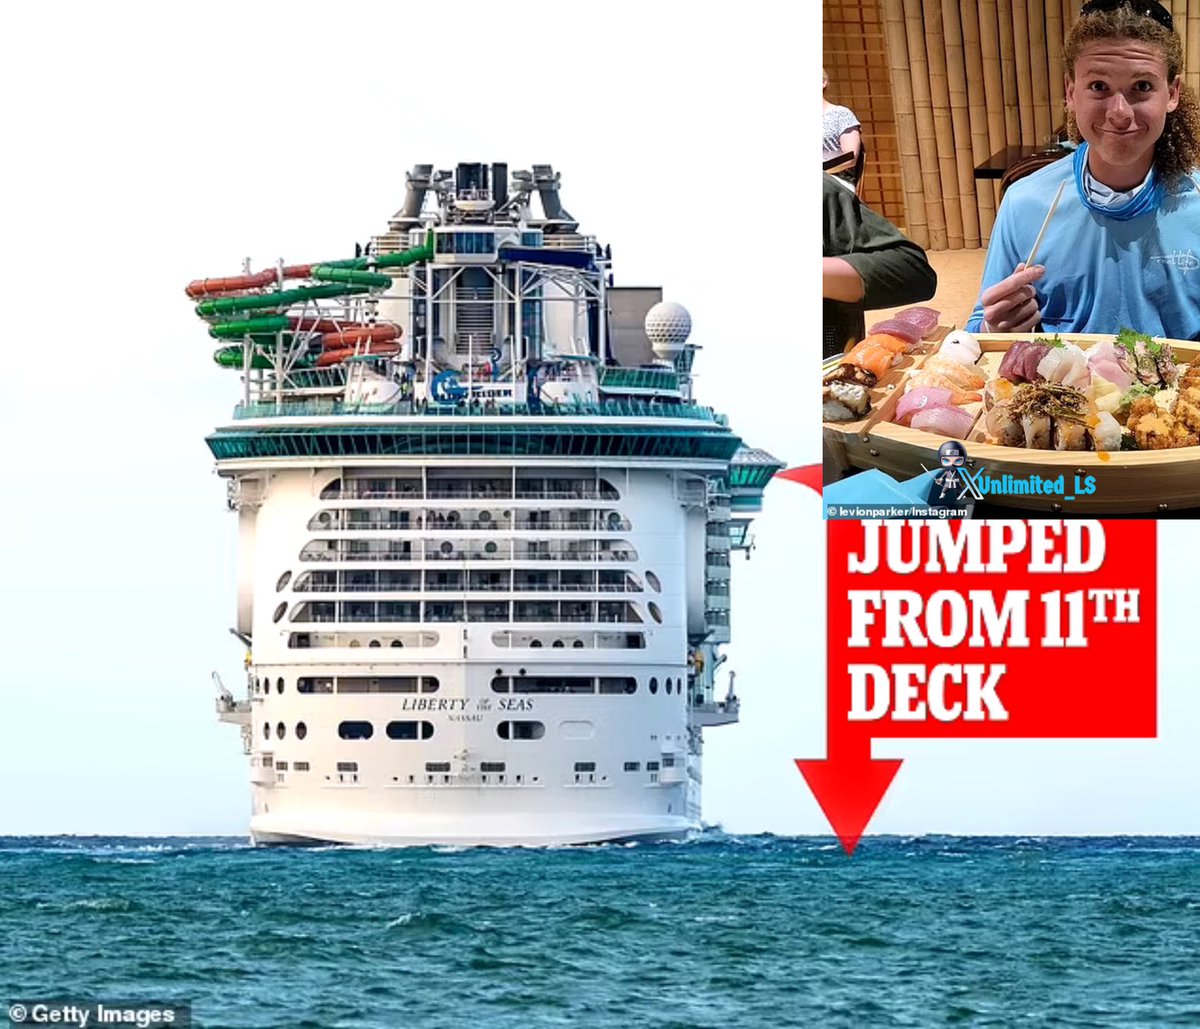 NEW: Teen jumps to his death from Royal Caribbean Cruise ship's 11th deck during a drunken argument with his dad

Levion Parker, 20, from North Port, Florida, was identified by Broward County Police, after the US Coast Guard abandoned the search near the Bahamas

'His dad was…